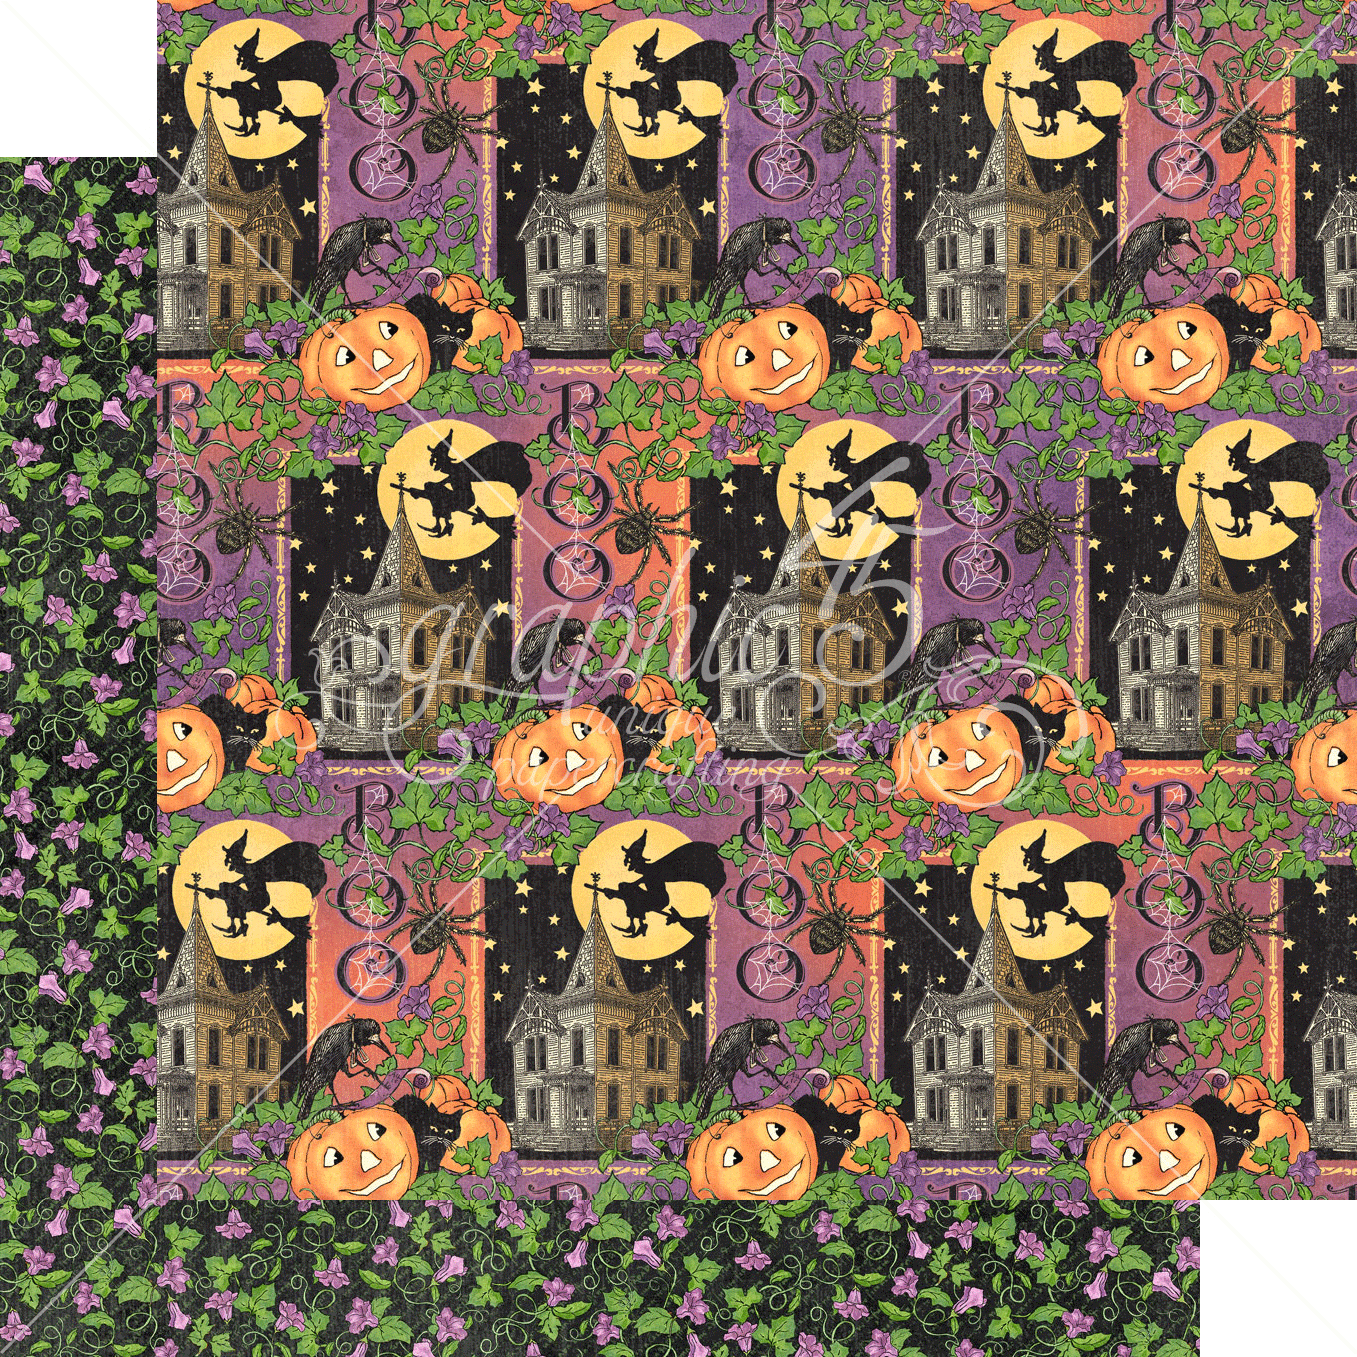 Charmed Collection So Spooky 12 x 12 Double-Sided Scrapbook Paper by Graphic 45 - Scrapbook Supply Companies